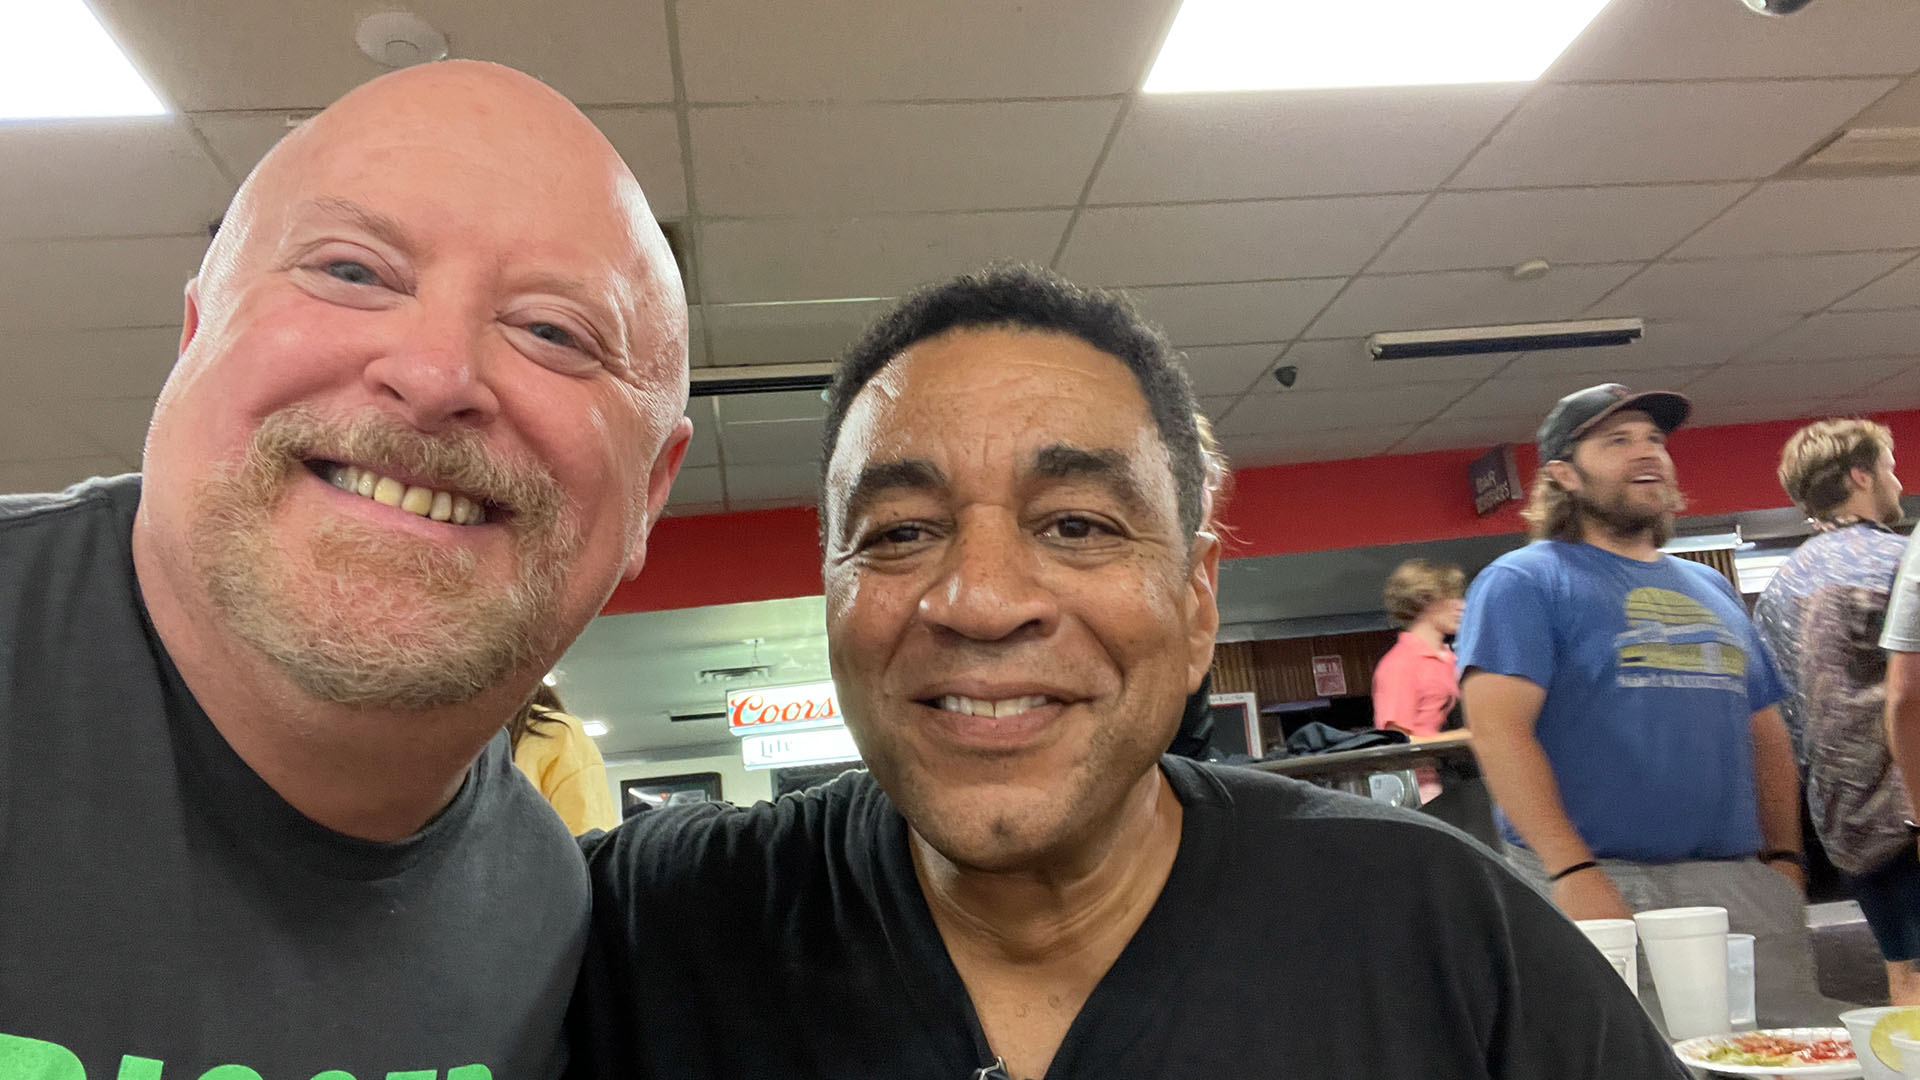 Chris Rogers and Harry Lennix bowling at the Wrap Party